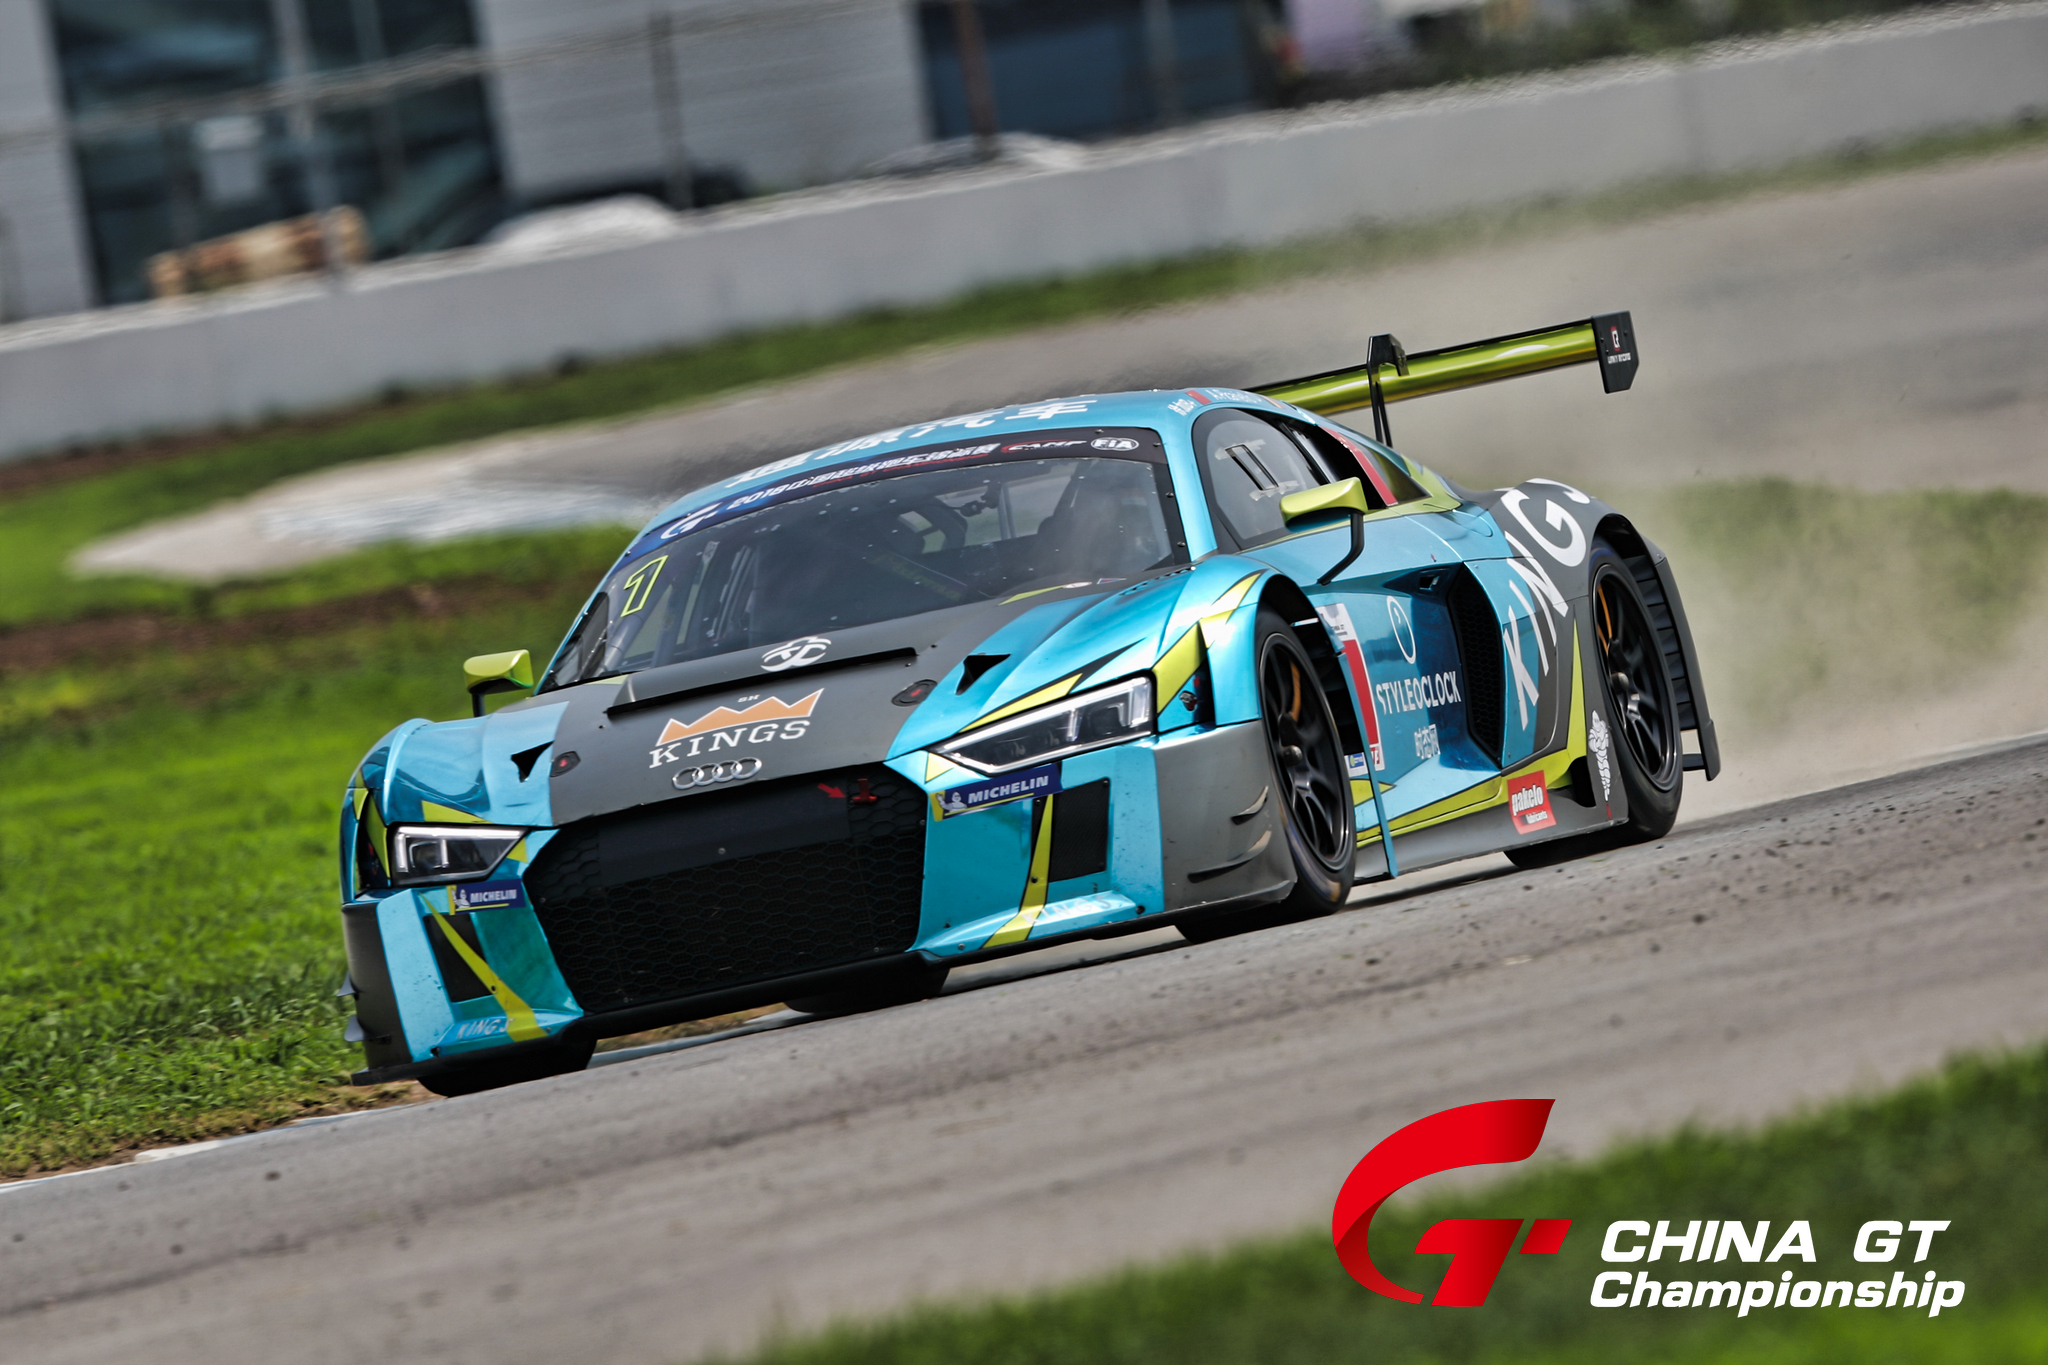 KINGS takes third consecutive pole while Xtreme Motorsports tops the timesheet in both GTC and GT4